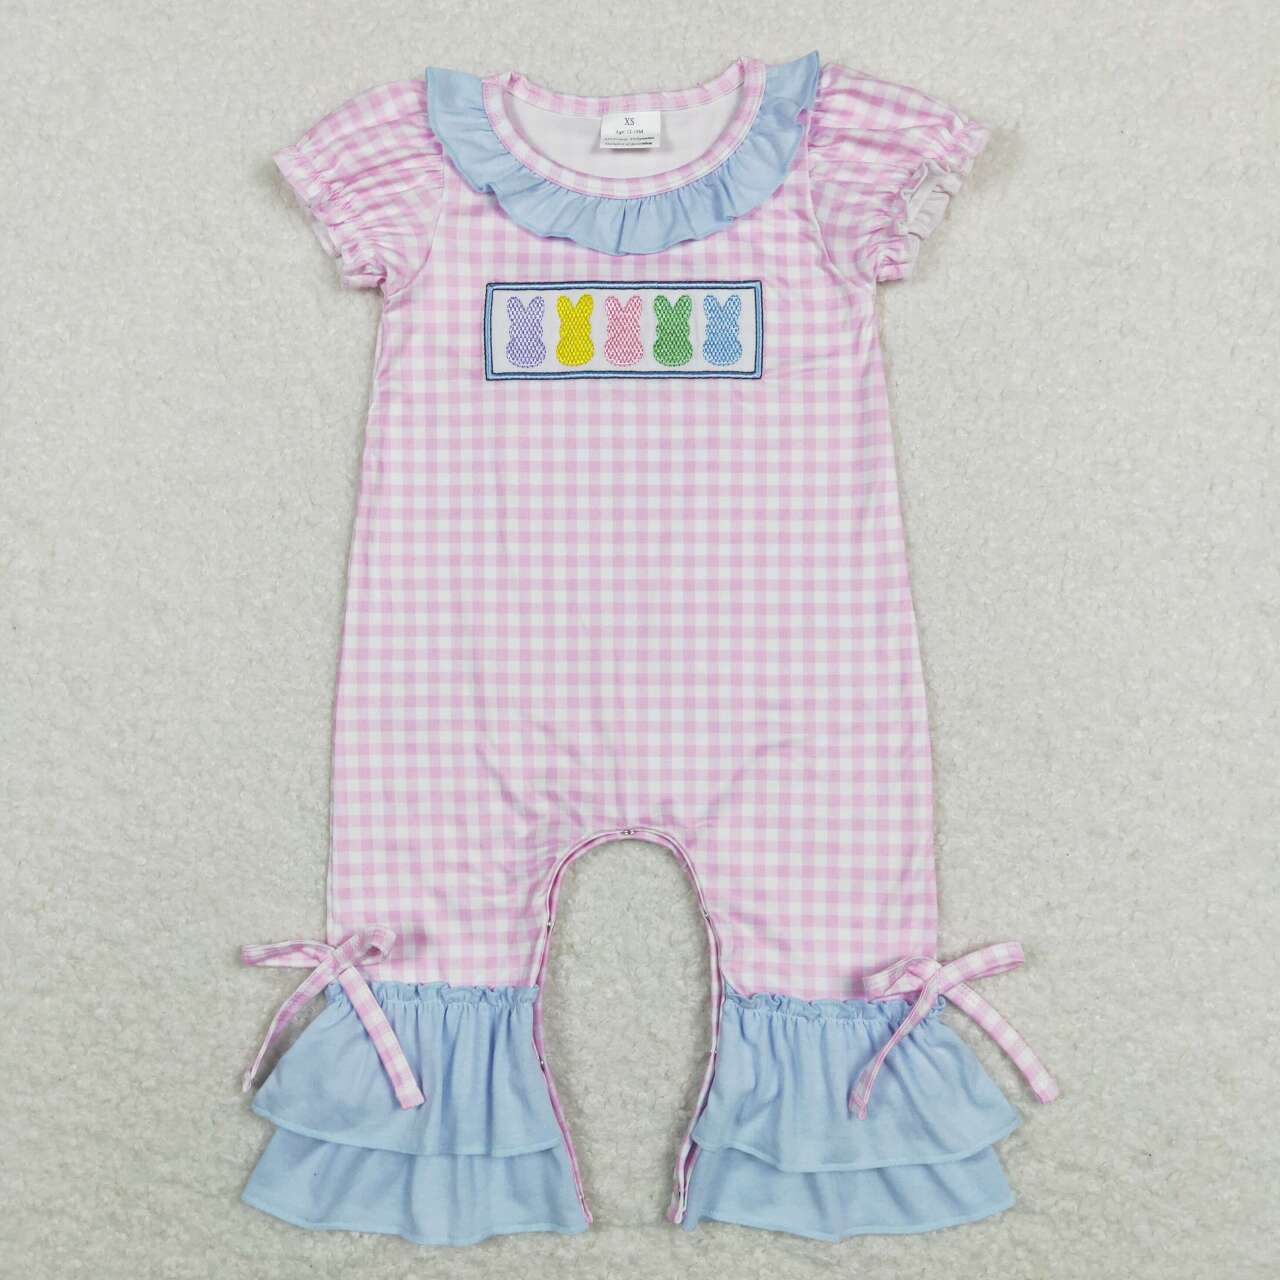 SR0689 Embroidered colorful bunny blue lace pink and white plaid short-sleeved jumpsuit